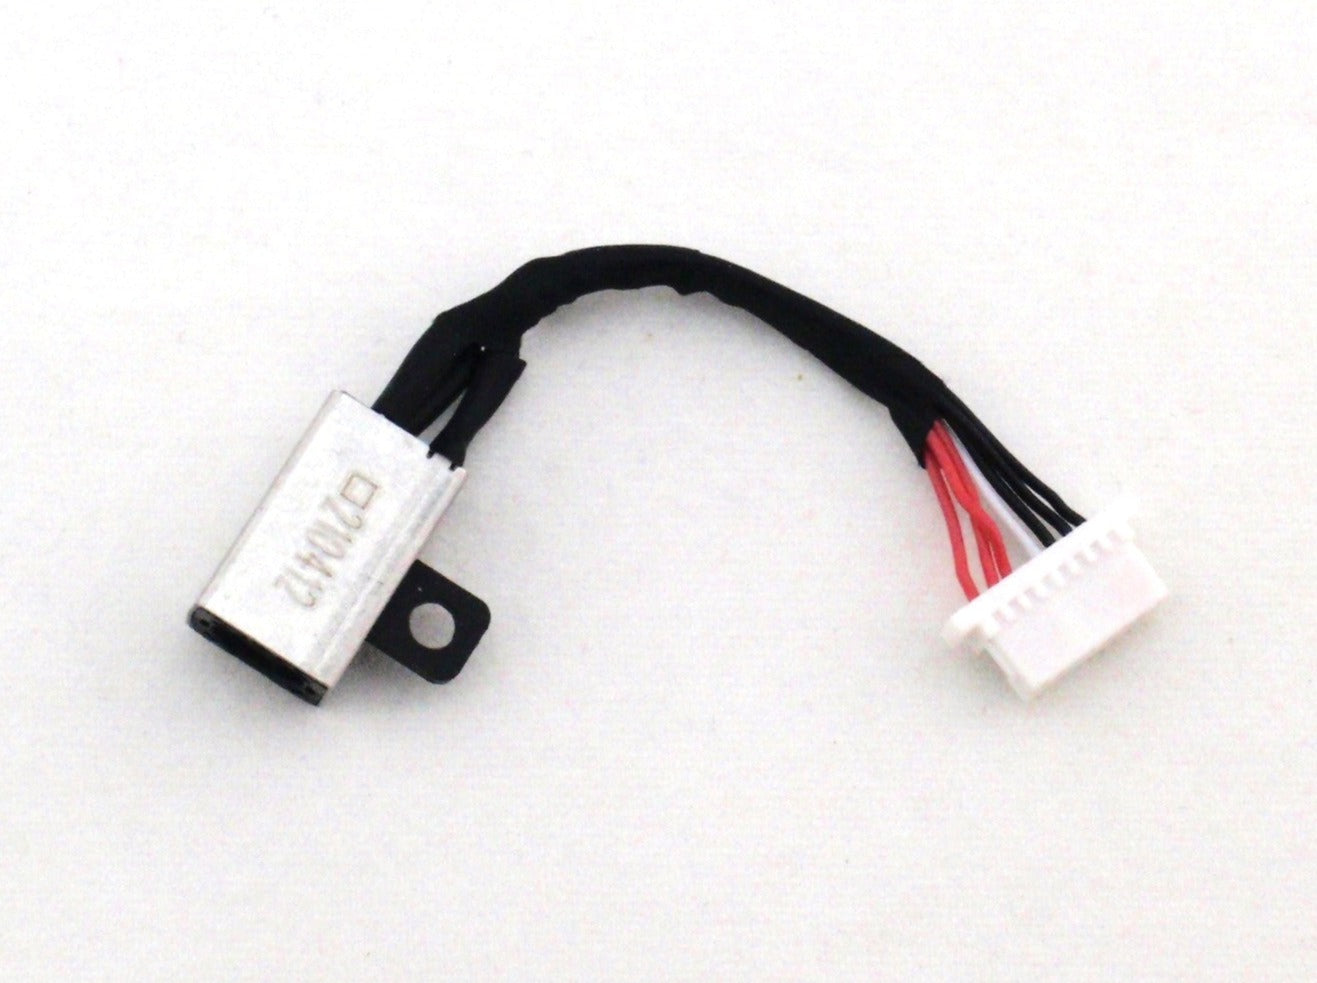 Dell New DC In Power Jack Charging Cable 0JDX1R Inspiron 11 3148 11-3148 13 7000 7347 7348 7352 7353 7359 15 7558 7568 7570 7573 JDX1R